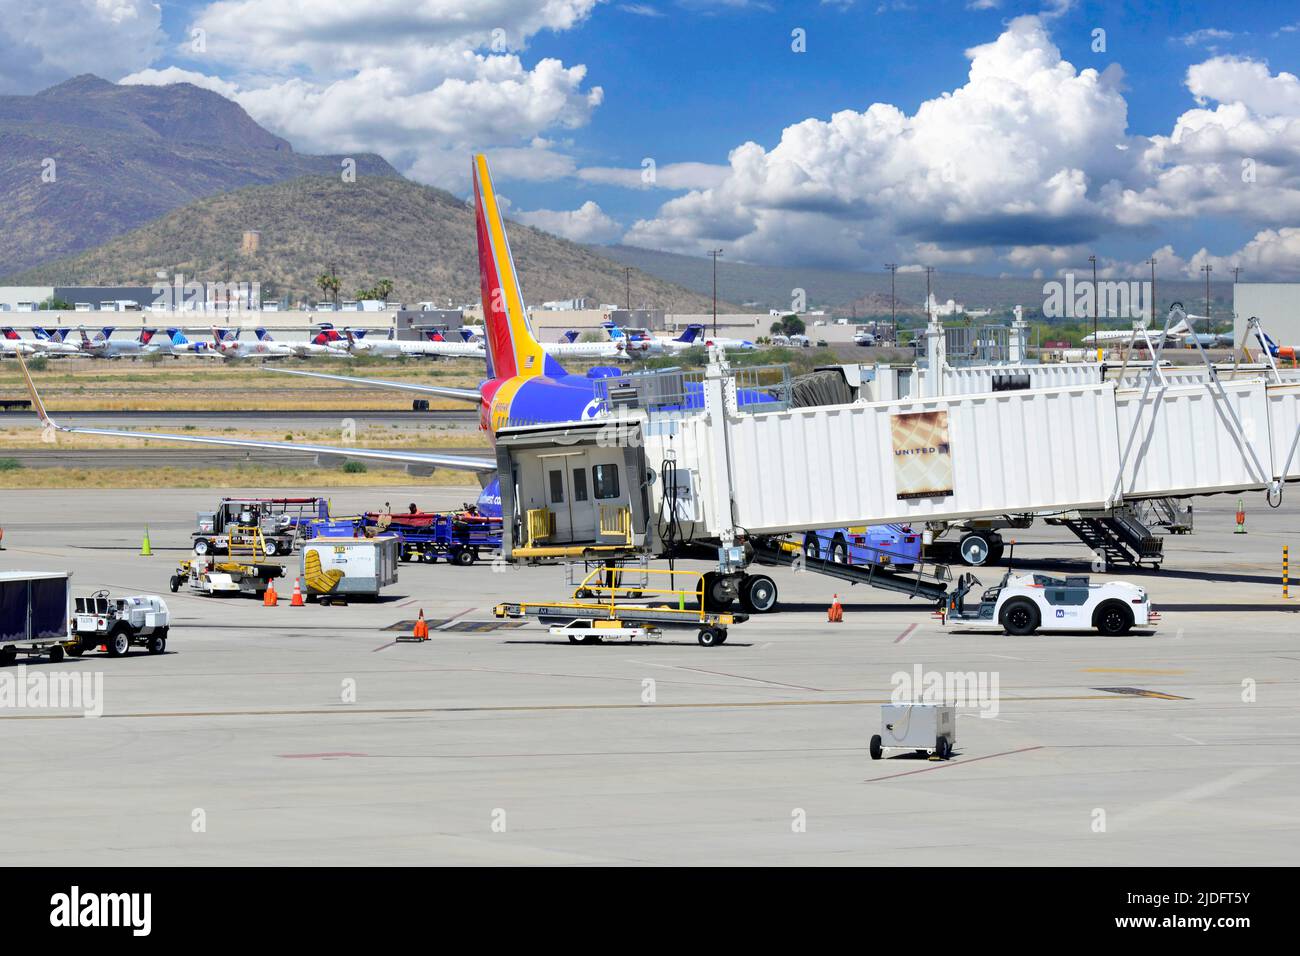 Southwest Airlines Boeing 737 being serviced at Tucson International Airport AZ Stock Photo